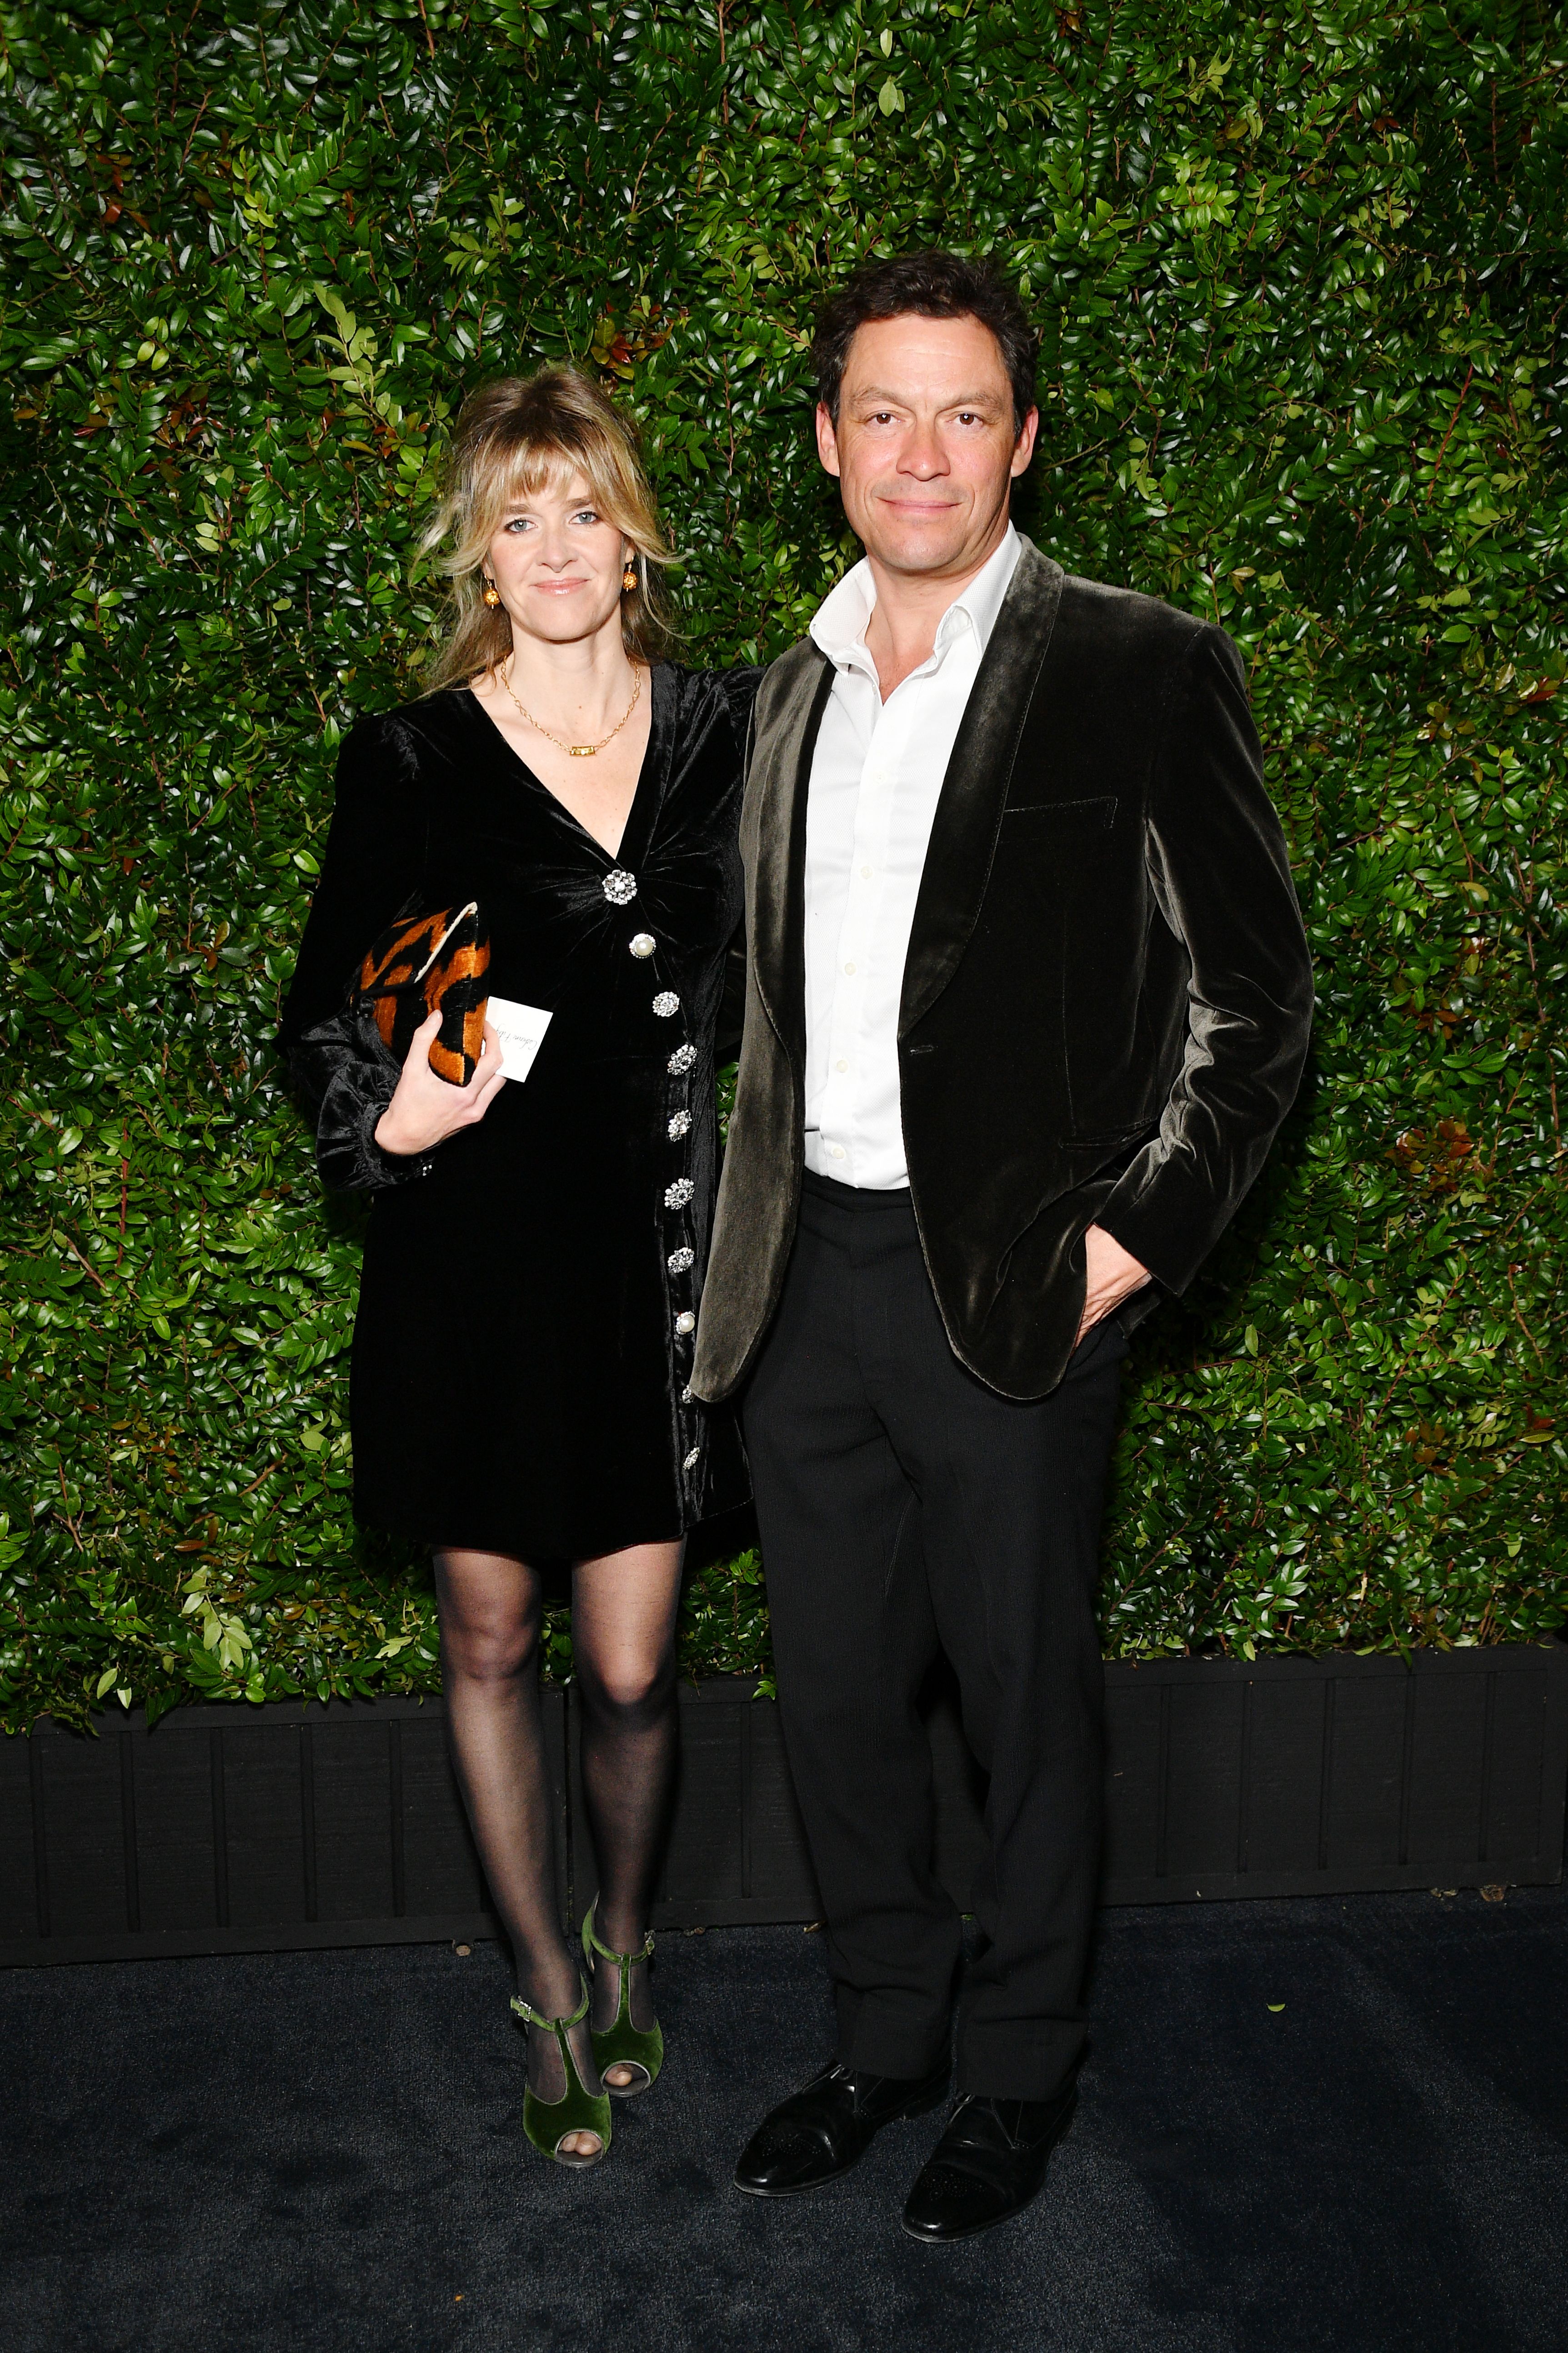 Dominic West and Catherine Fitzgerald at the Chanel And Charles Finch Pre-Oscar Awards Dinner in 2019 in Hollywood | Source: Getty Images